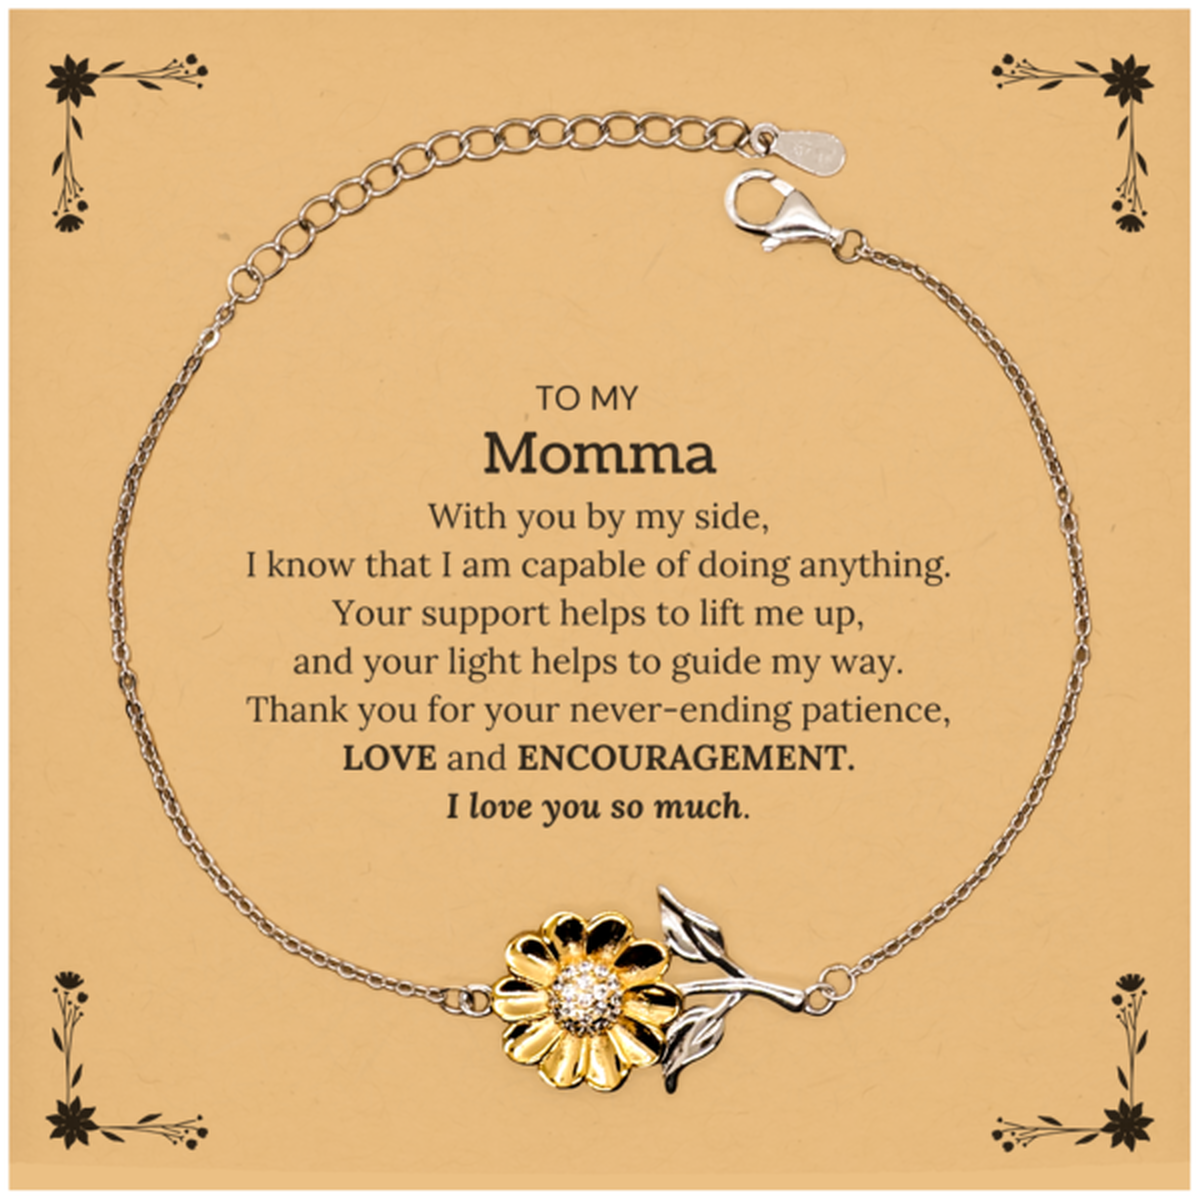 Appreciation Momma Sunflower Bracelet Gifts, To My Momma Birthday Christmas Wedding Keepsake Gifts for Momma With you by my side, I know that I am capable of doing anything. I love you so much